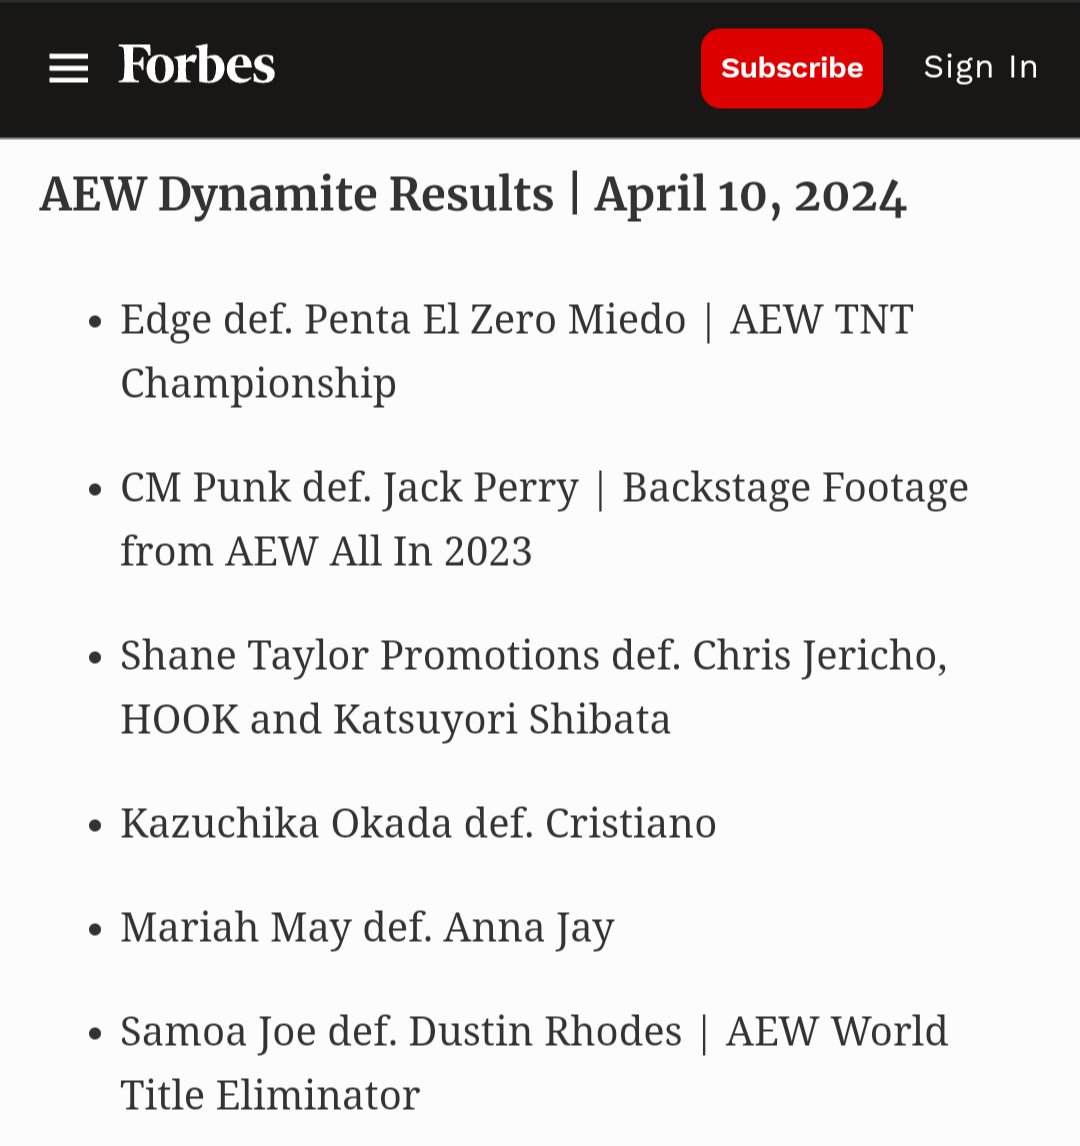 'CM Punk def. Jack Perry' Even Forbes is cooking AEW 😭